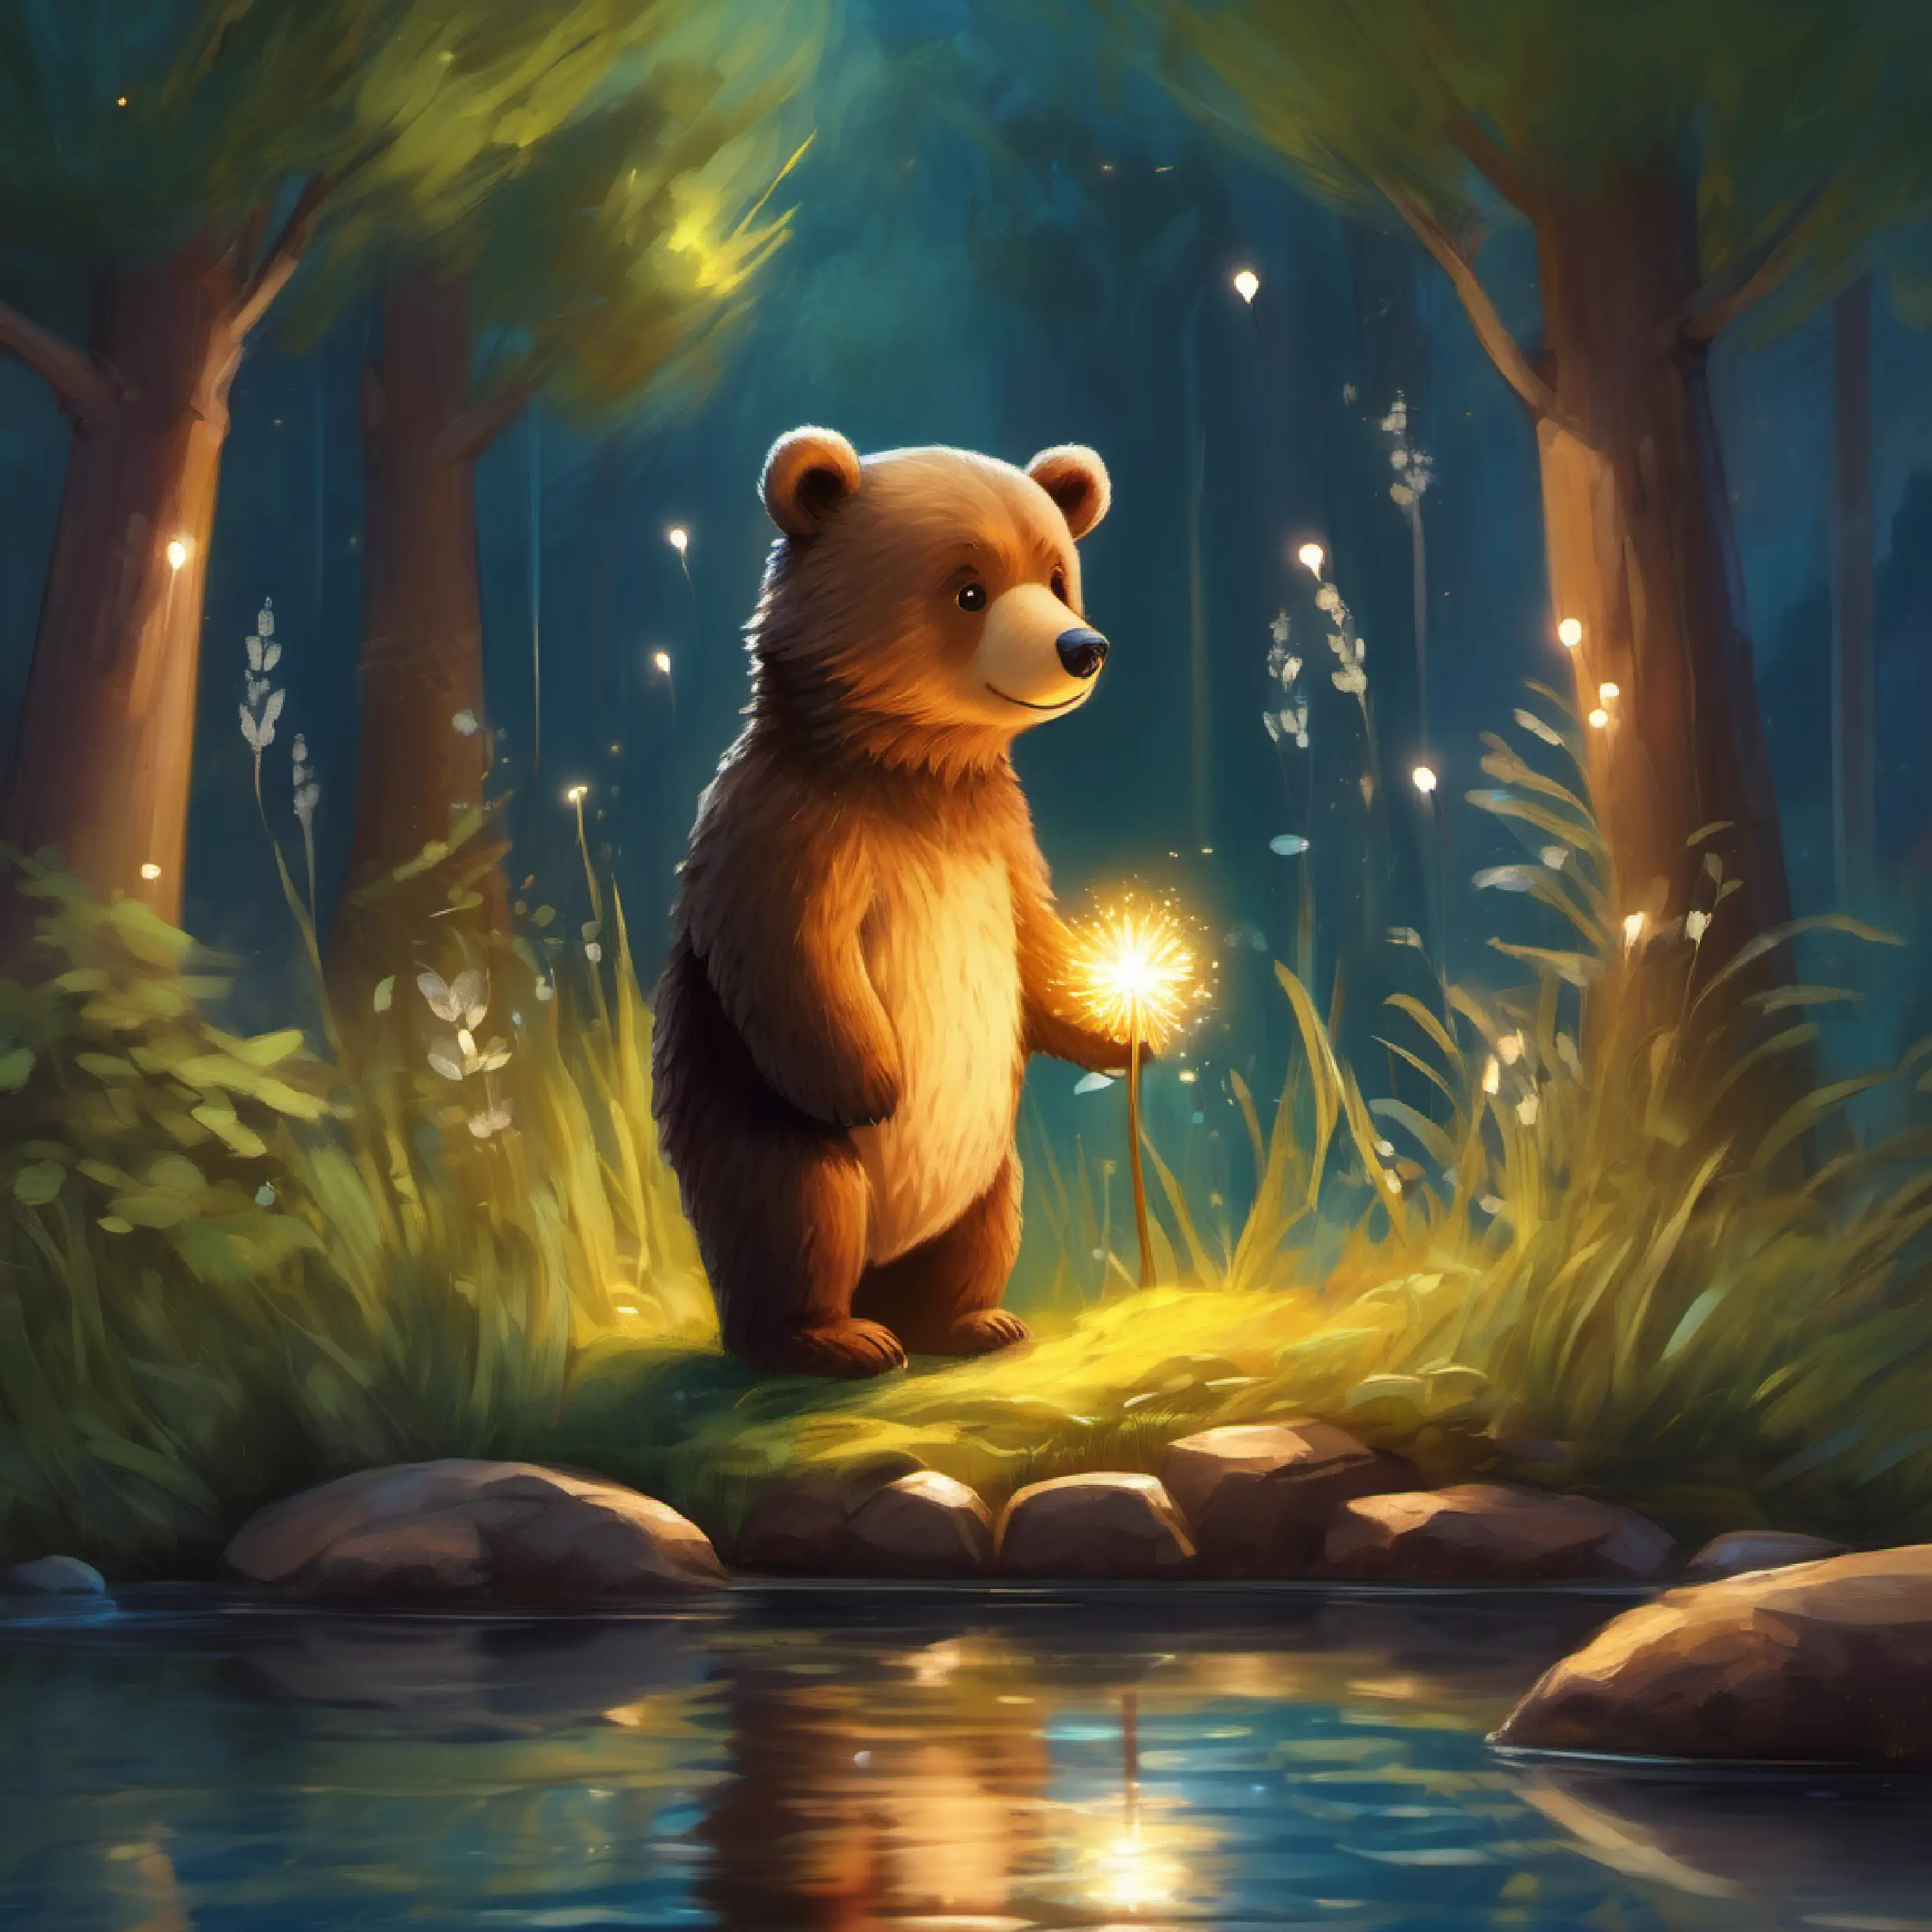 Little bear, fluffy, with curious brown eyes finds a Pond of Wishes and makes a wish.